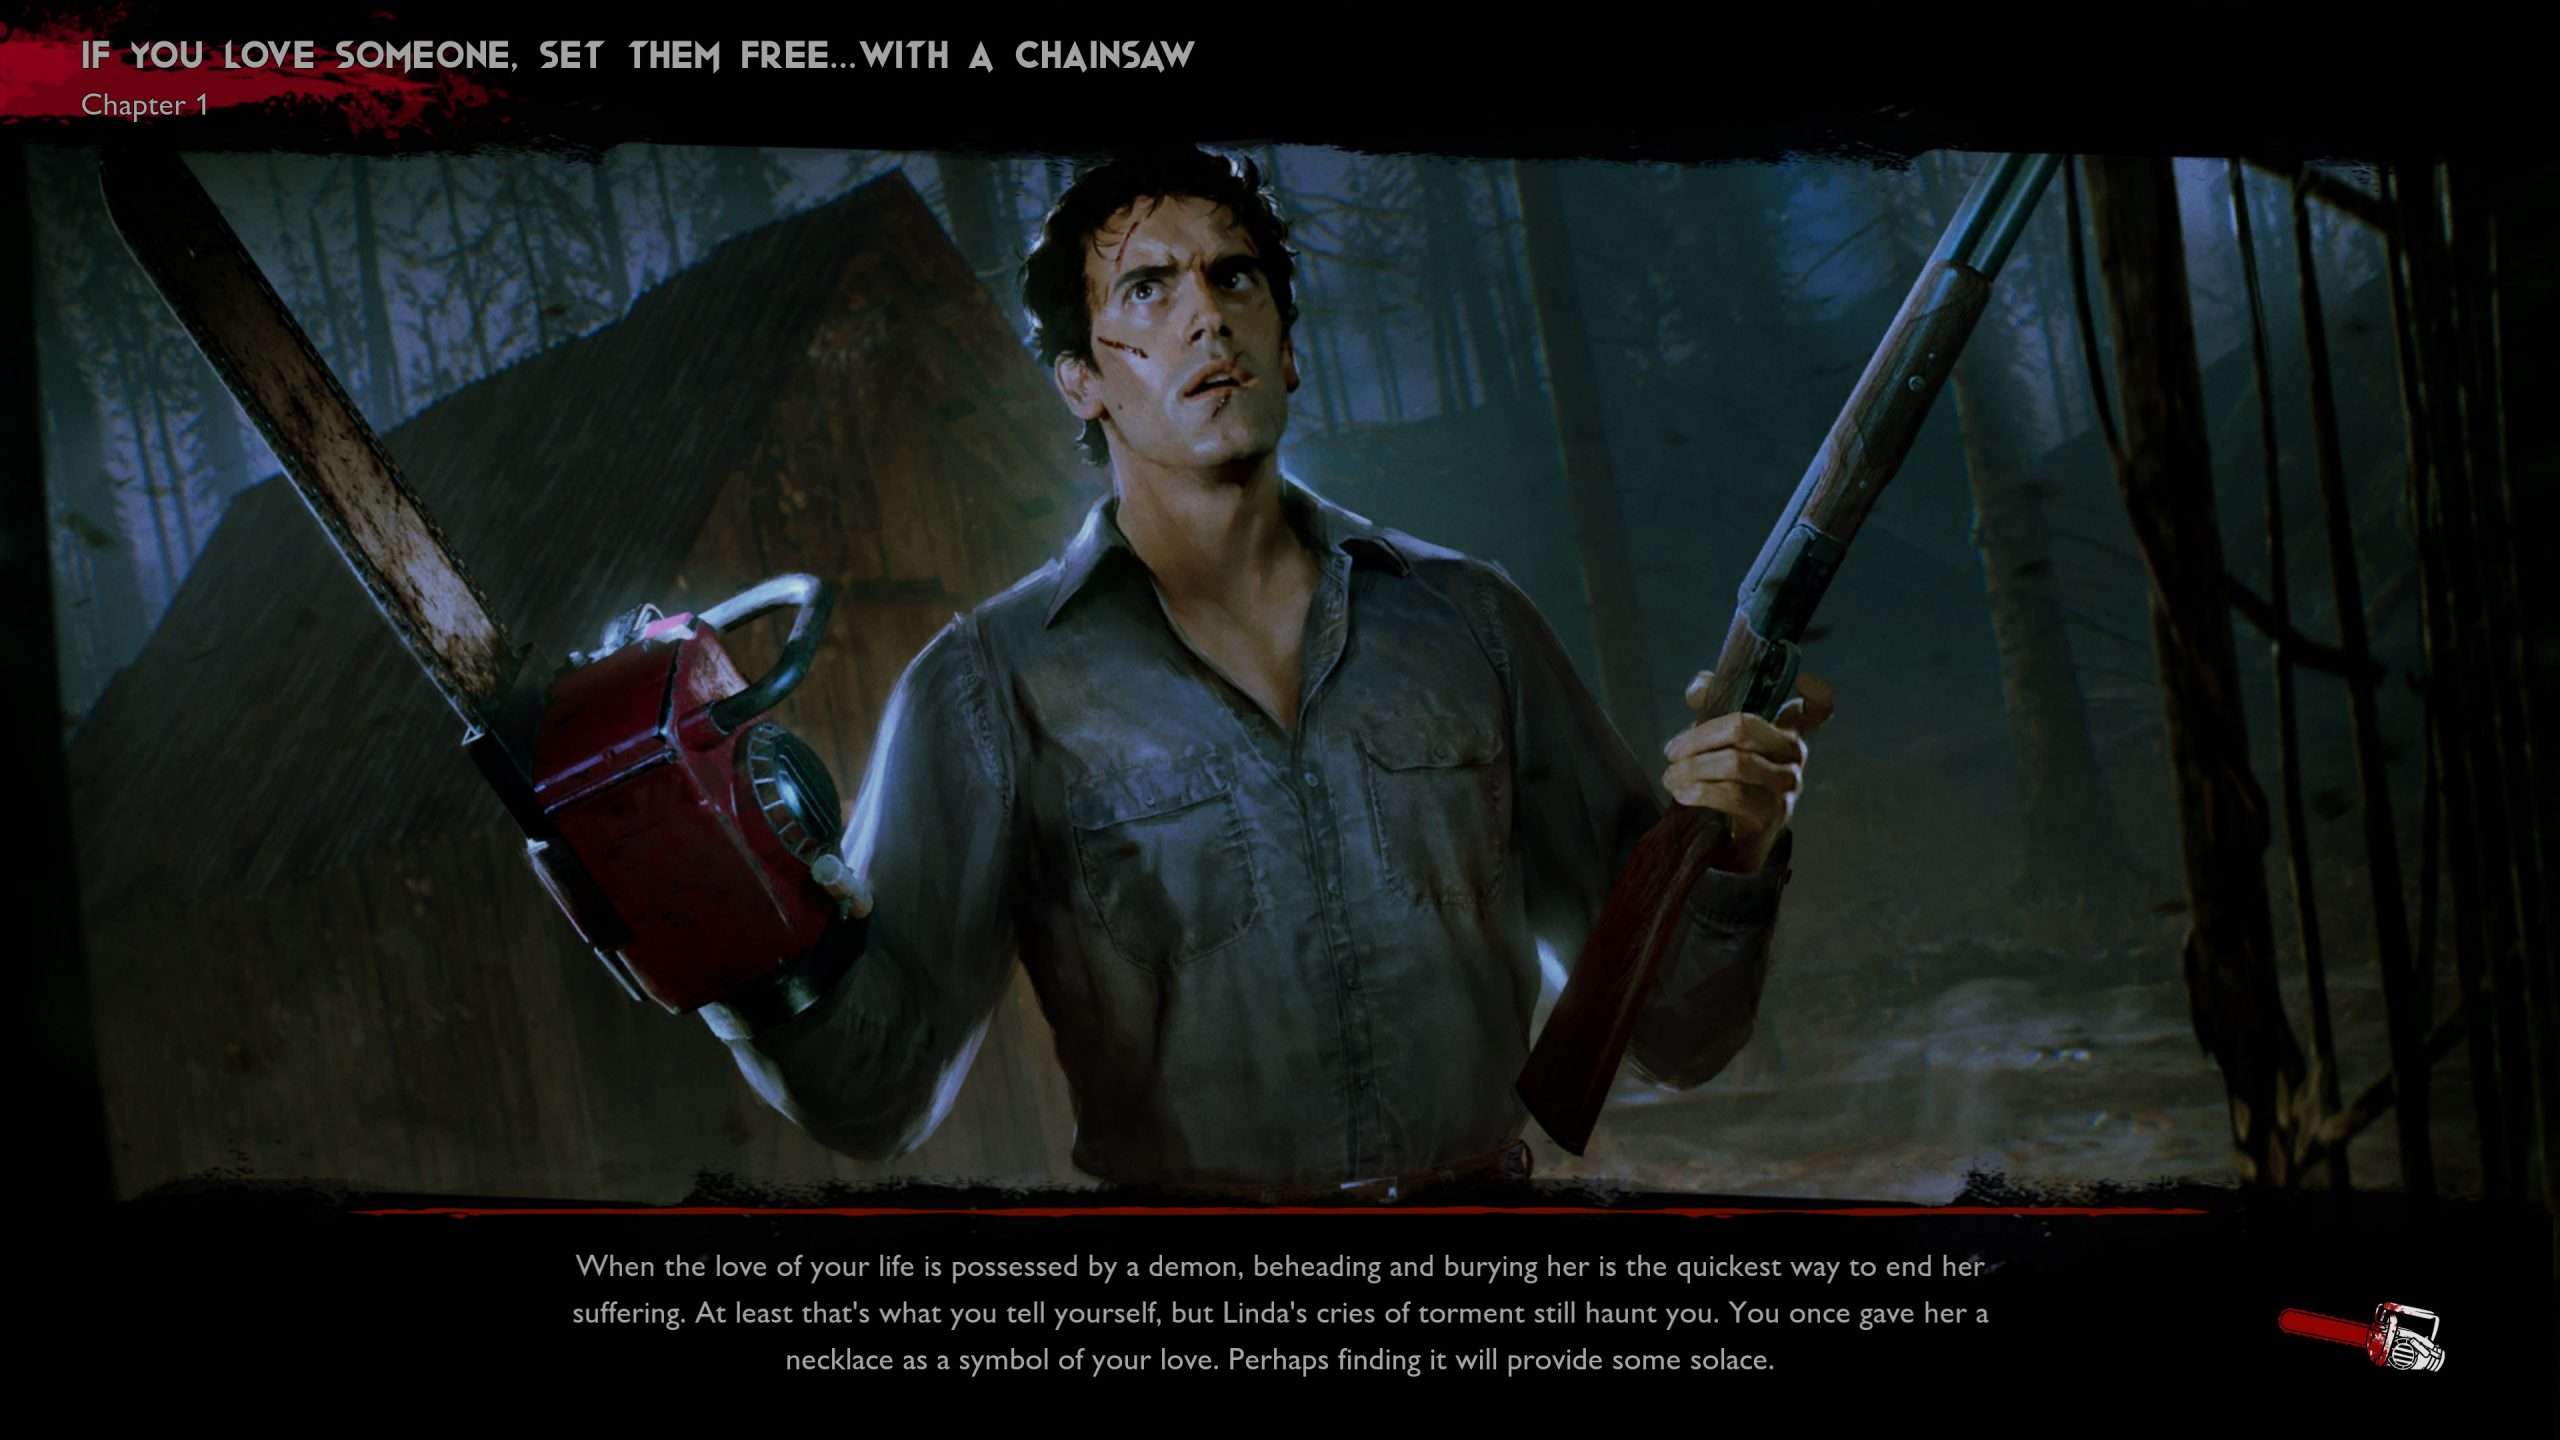 Season 1 Pass is OVER???  Evil Dead: The Game 